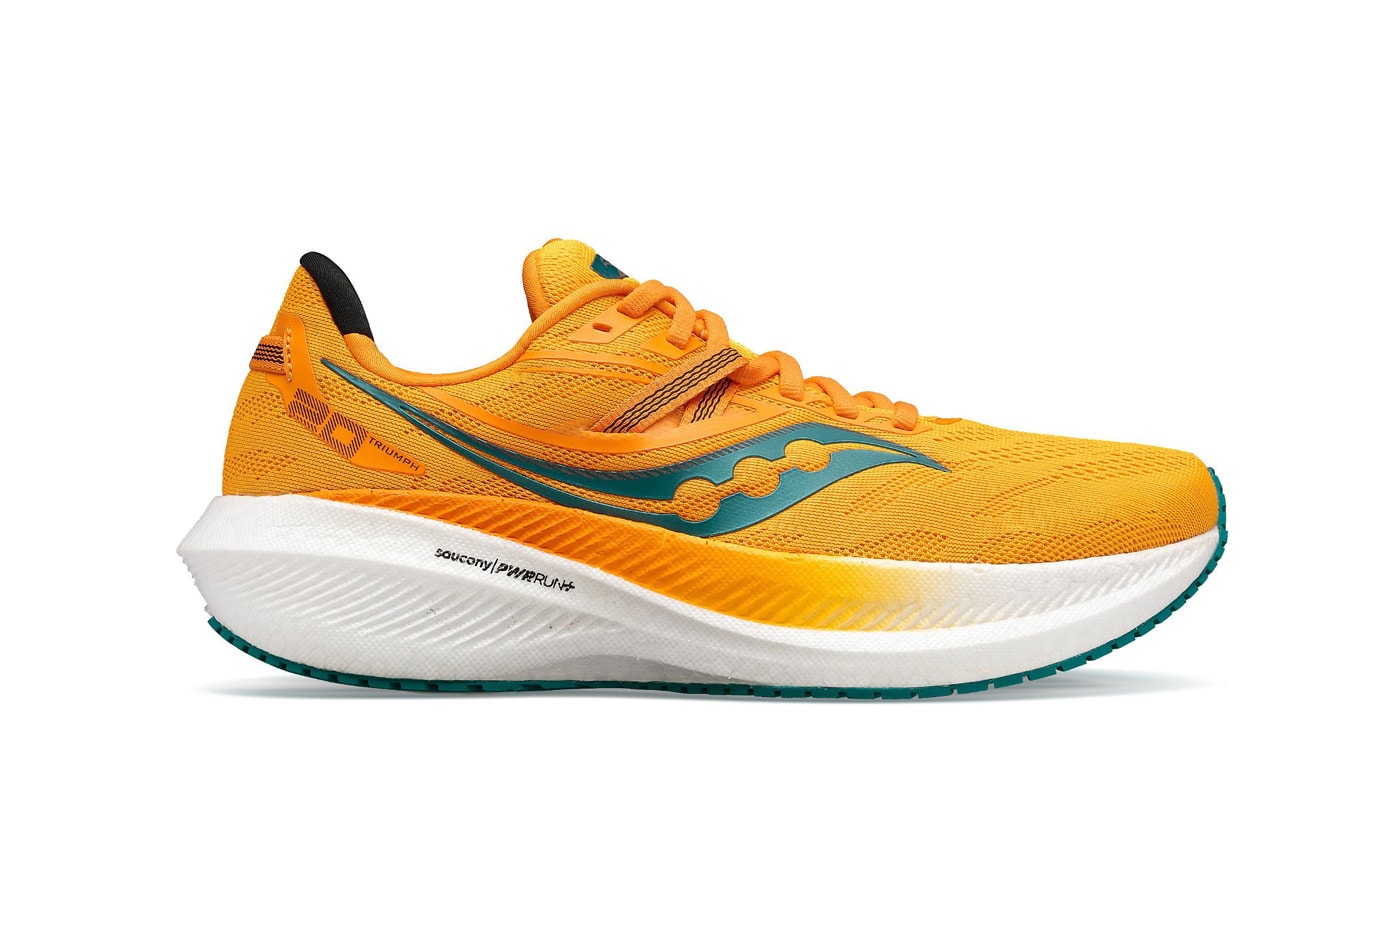 Saucony Triumph 20 best running shoes right now